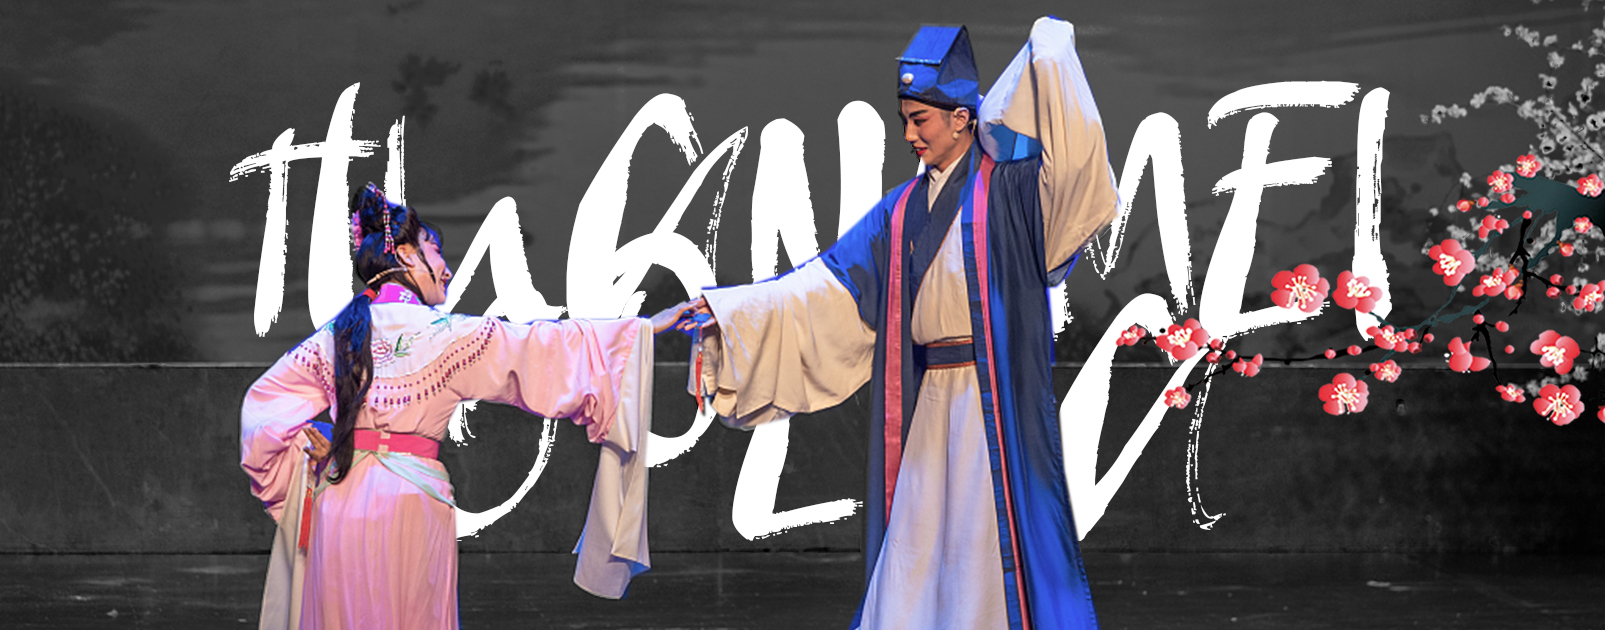 Huangmei Opera: An operatic art that has evolved from the ballads sung by women while picking tea leaves